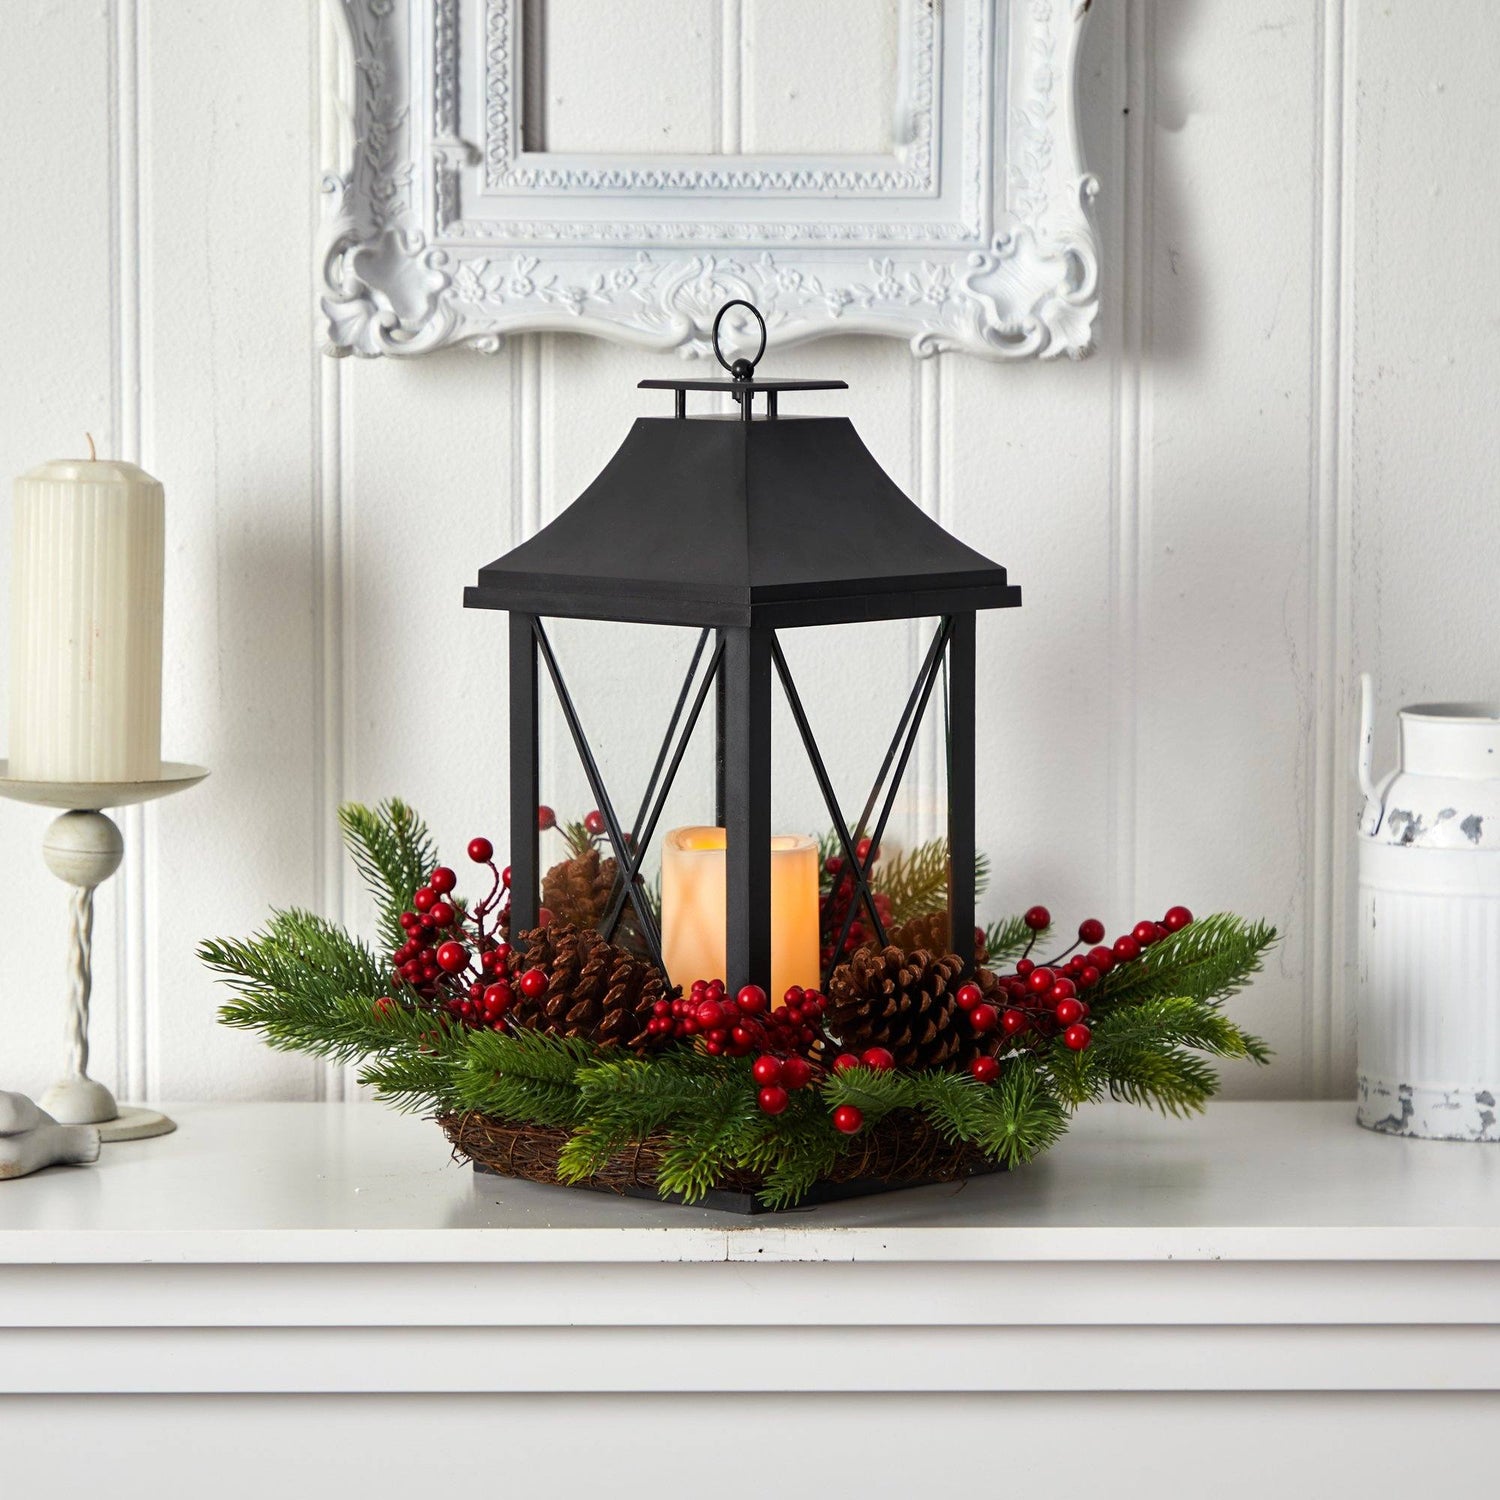 16" Holiday Berries, Pinecones and Greenery with Lantern and Included LED Candle Table Arrangement"